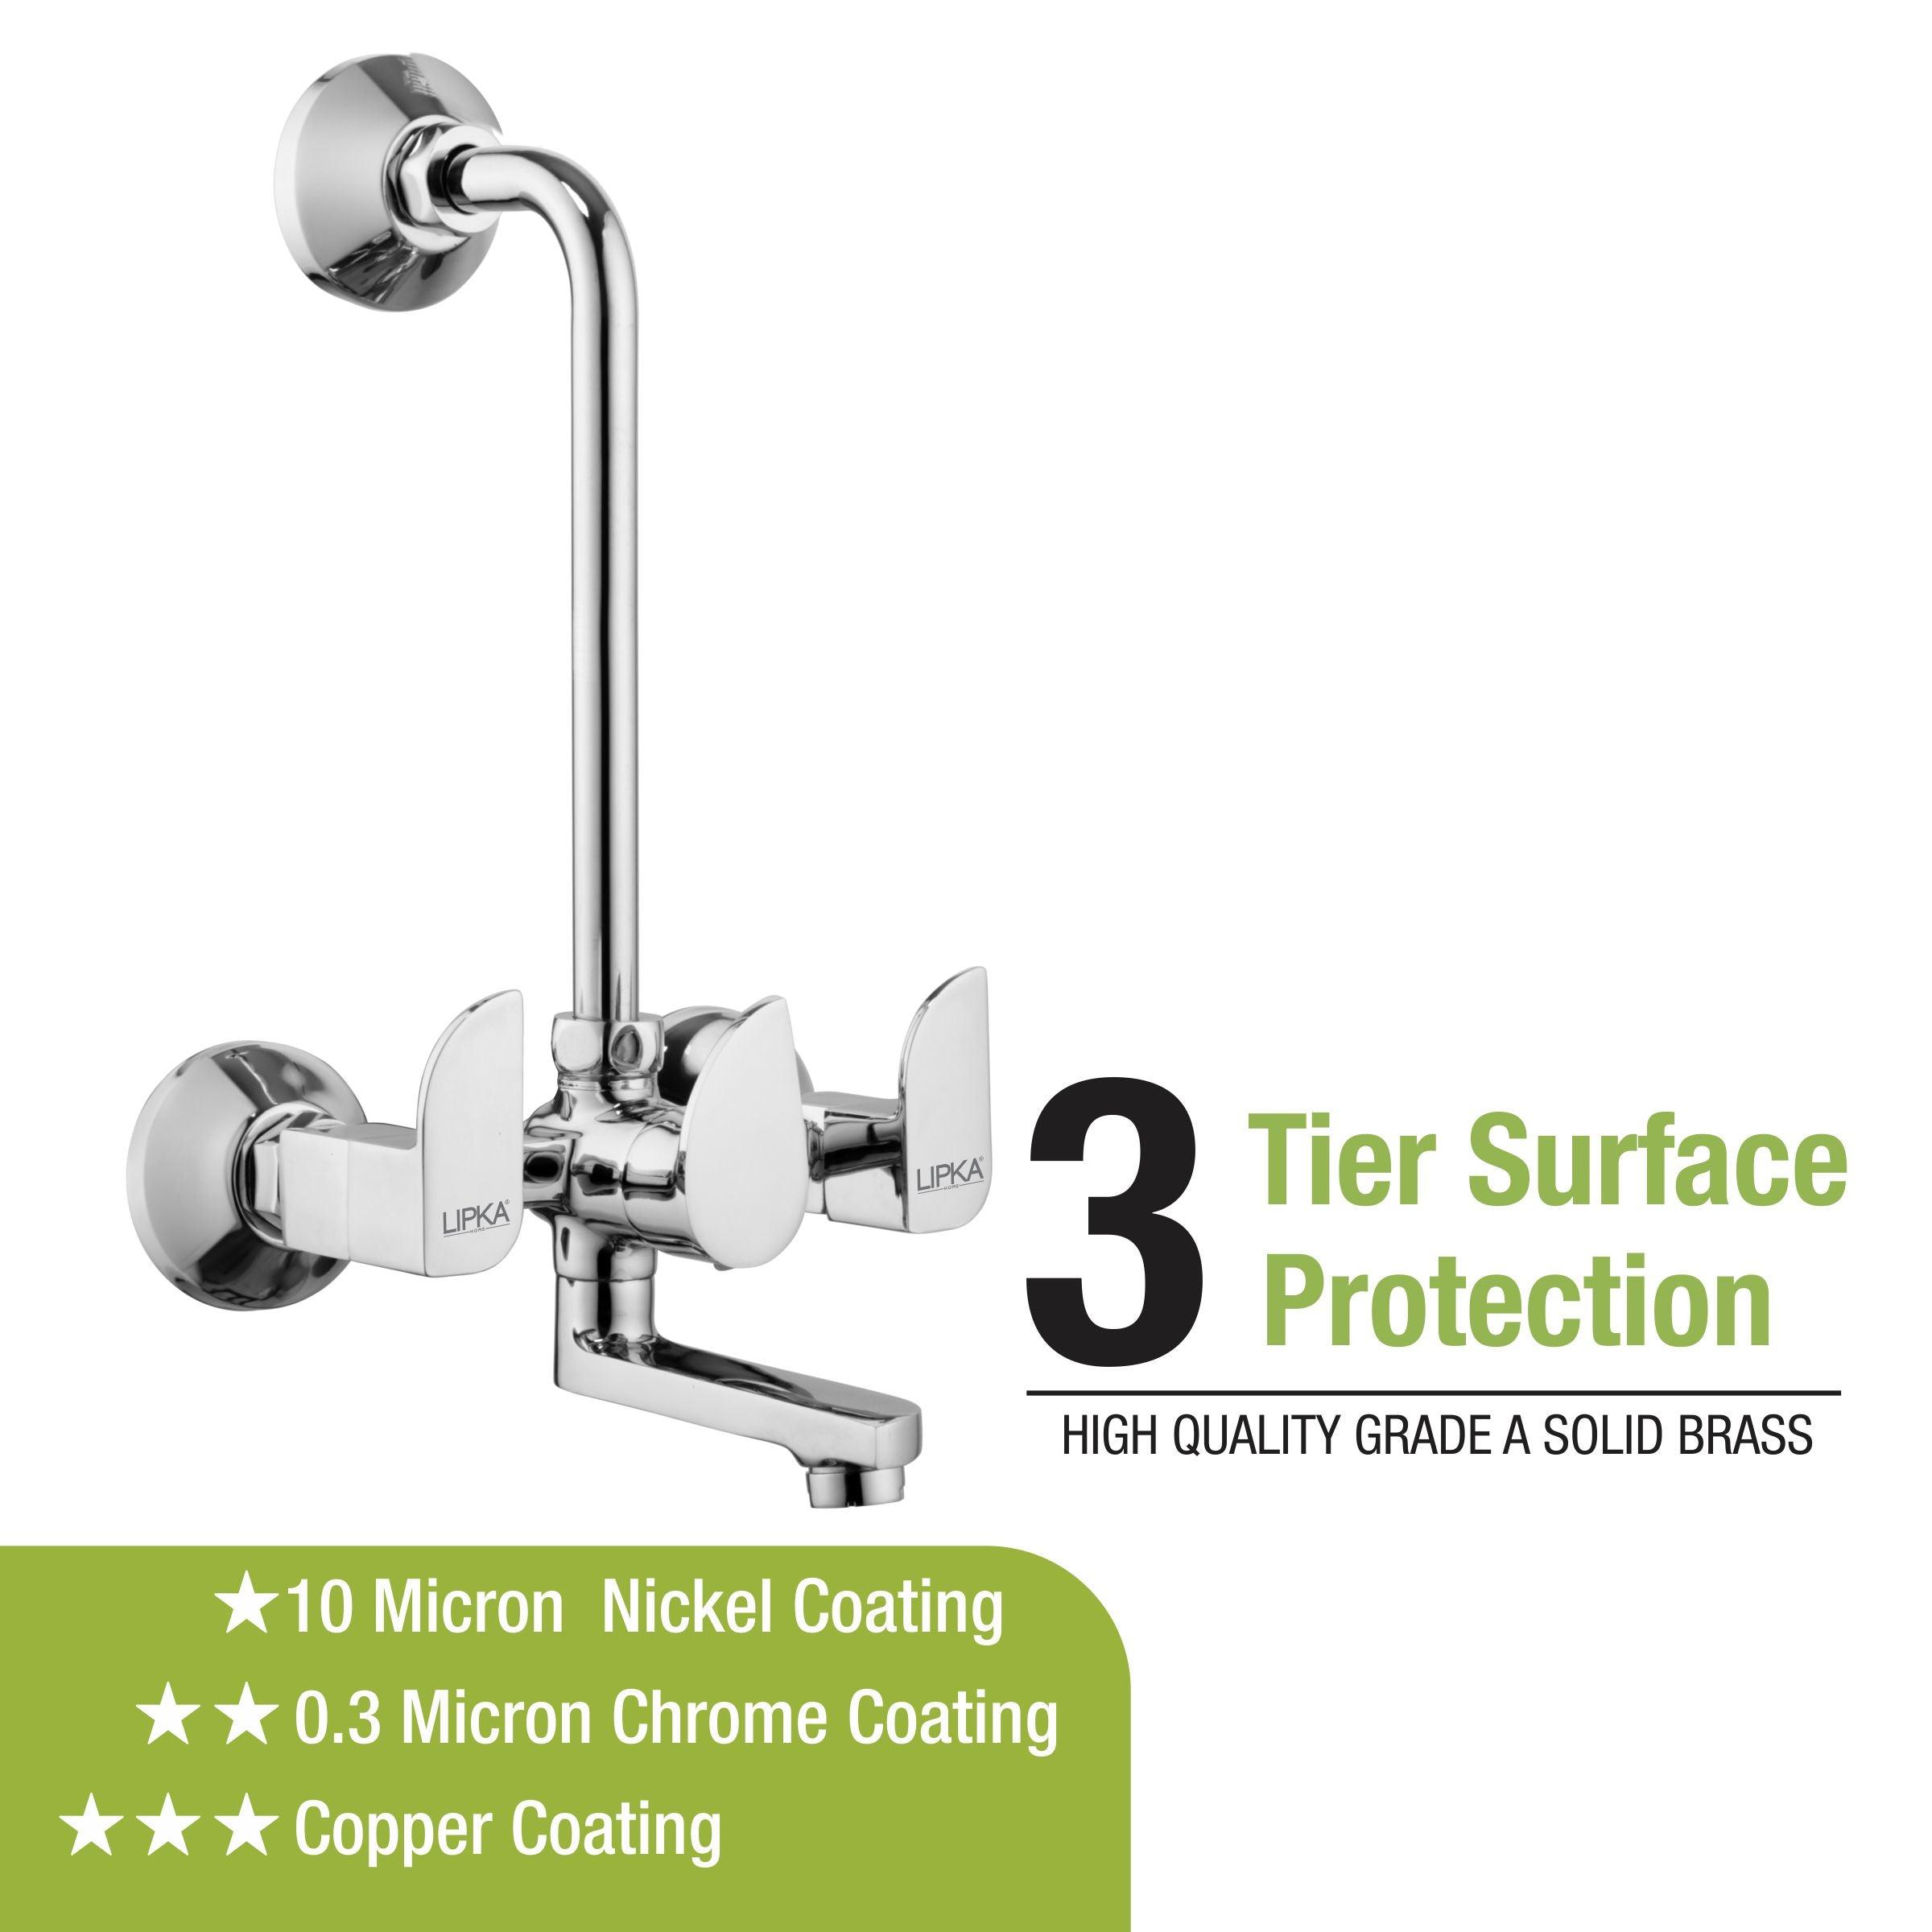 Arise Wall Mixer with L Bend Faucet with 3 tier surface protection